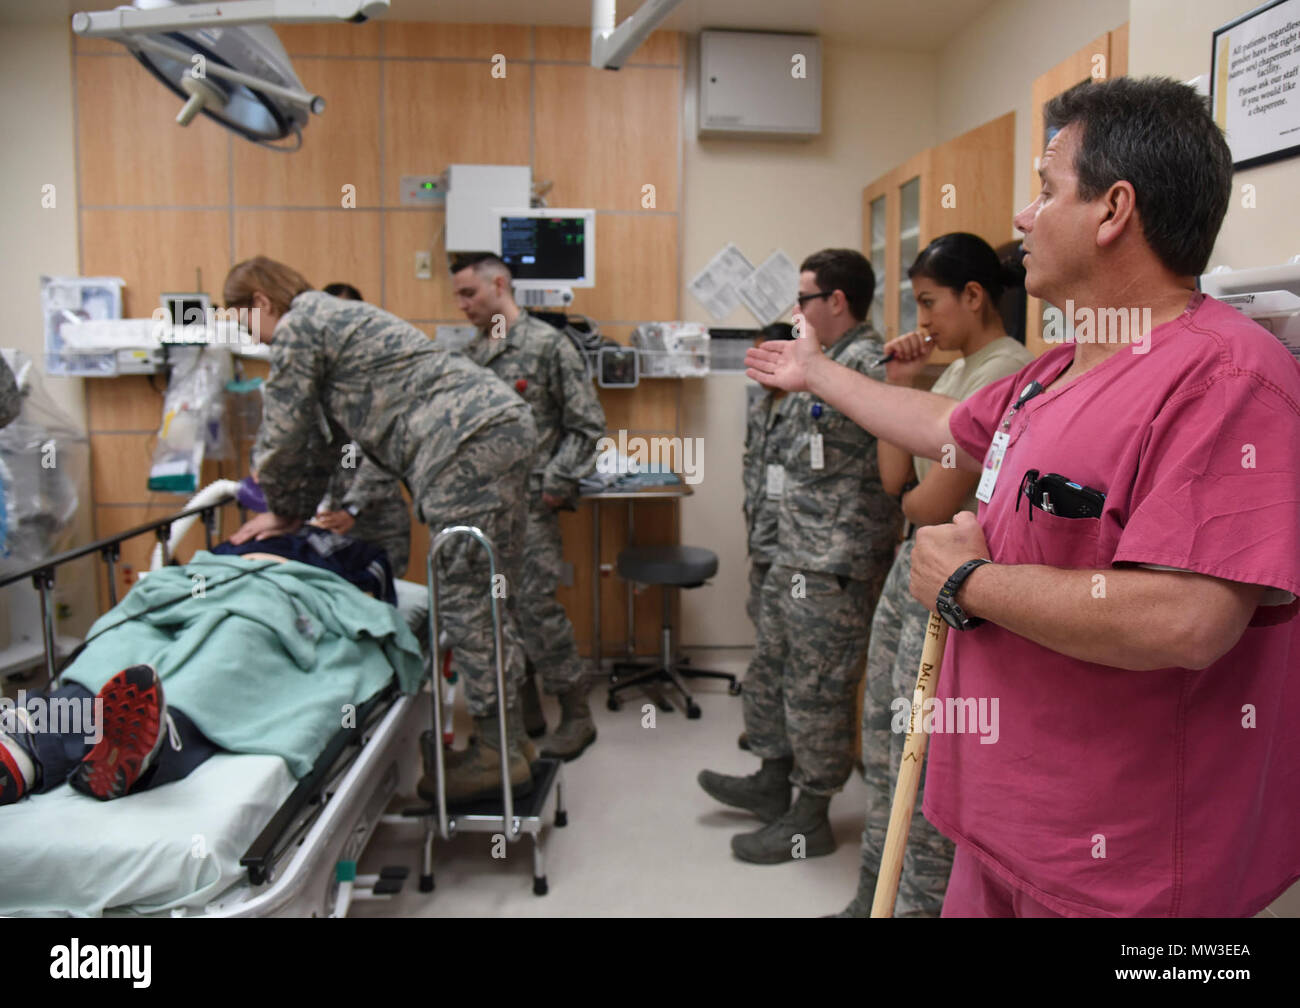 Dale Rowell, 81st Medical Operations Squadron charge nurse, instructs staff members as they participate in a medical emergency scenario during Code Blue Thursday in the Keesler Medical Center emergency room April 27, 2017, on Keesler Air Force Base, Miss. Emergency room staff members coordinated with the simulation lab to use human patient simulators for running various advanced cardiac life support scenarios to improve Keesler’s new medical technicians’ skills and get them familiar with emergency equipment. Stock Photo